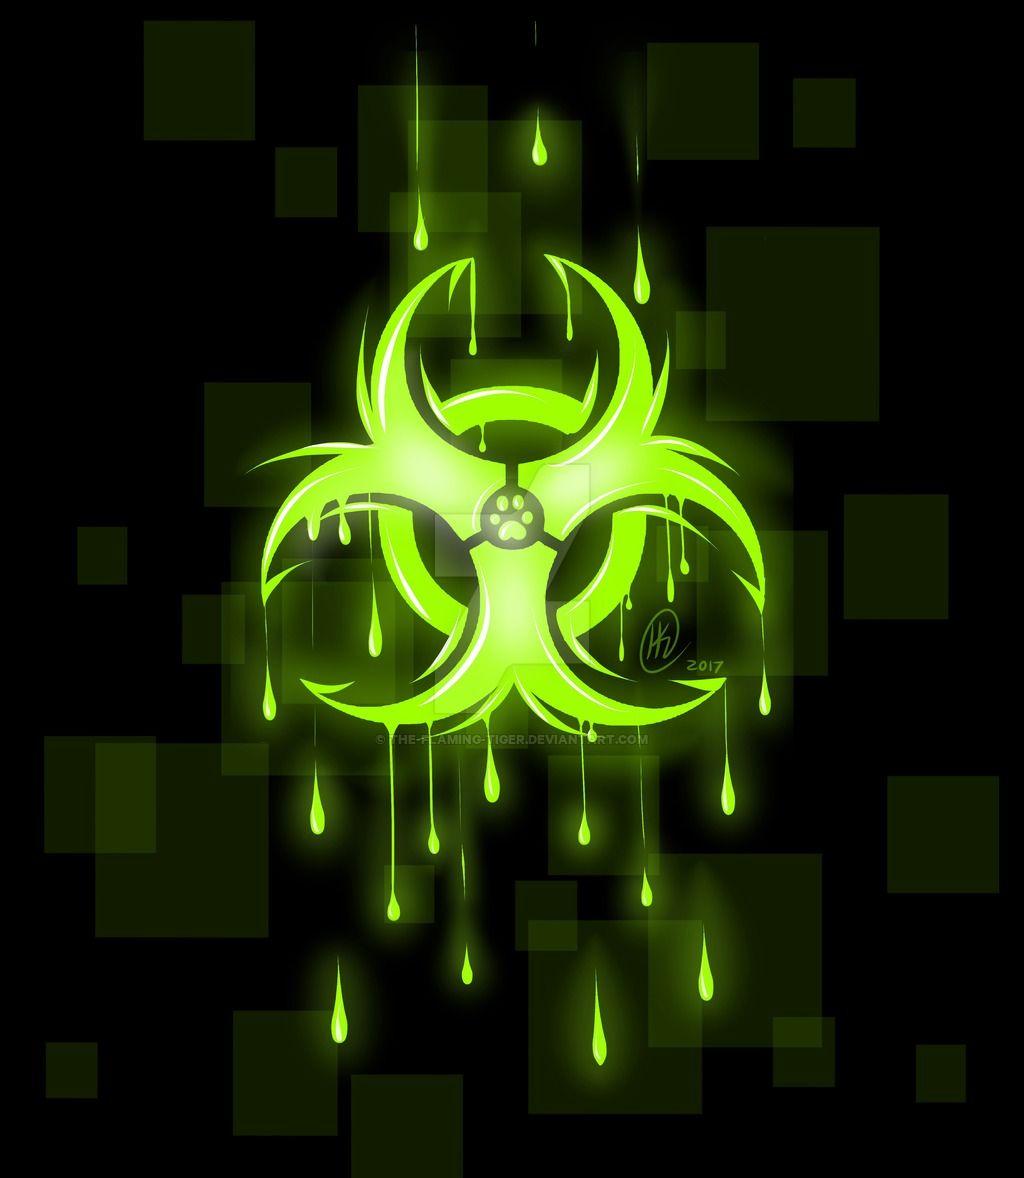 Cool Toxic Logo - Toxic by The-Flaming-Tiger on DeviantArt